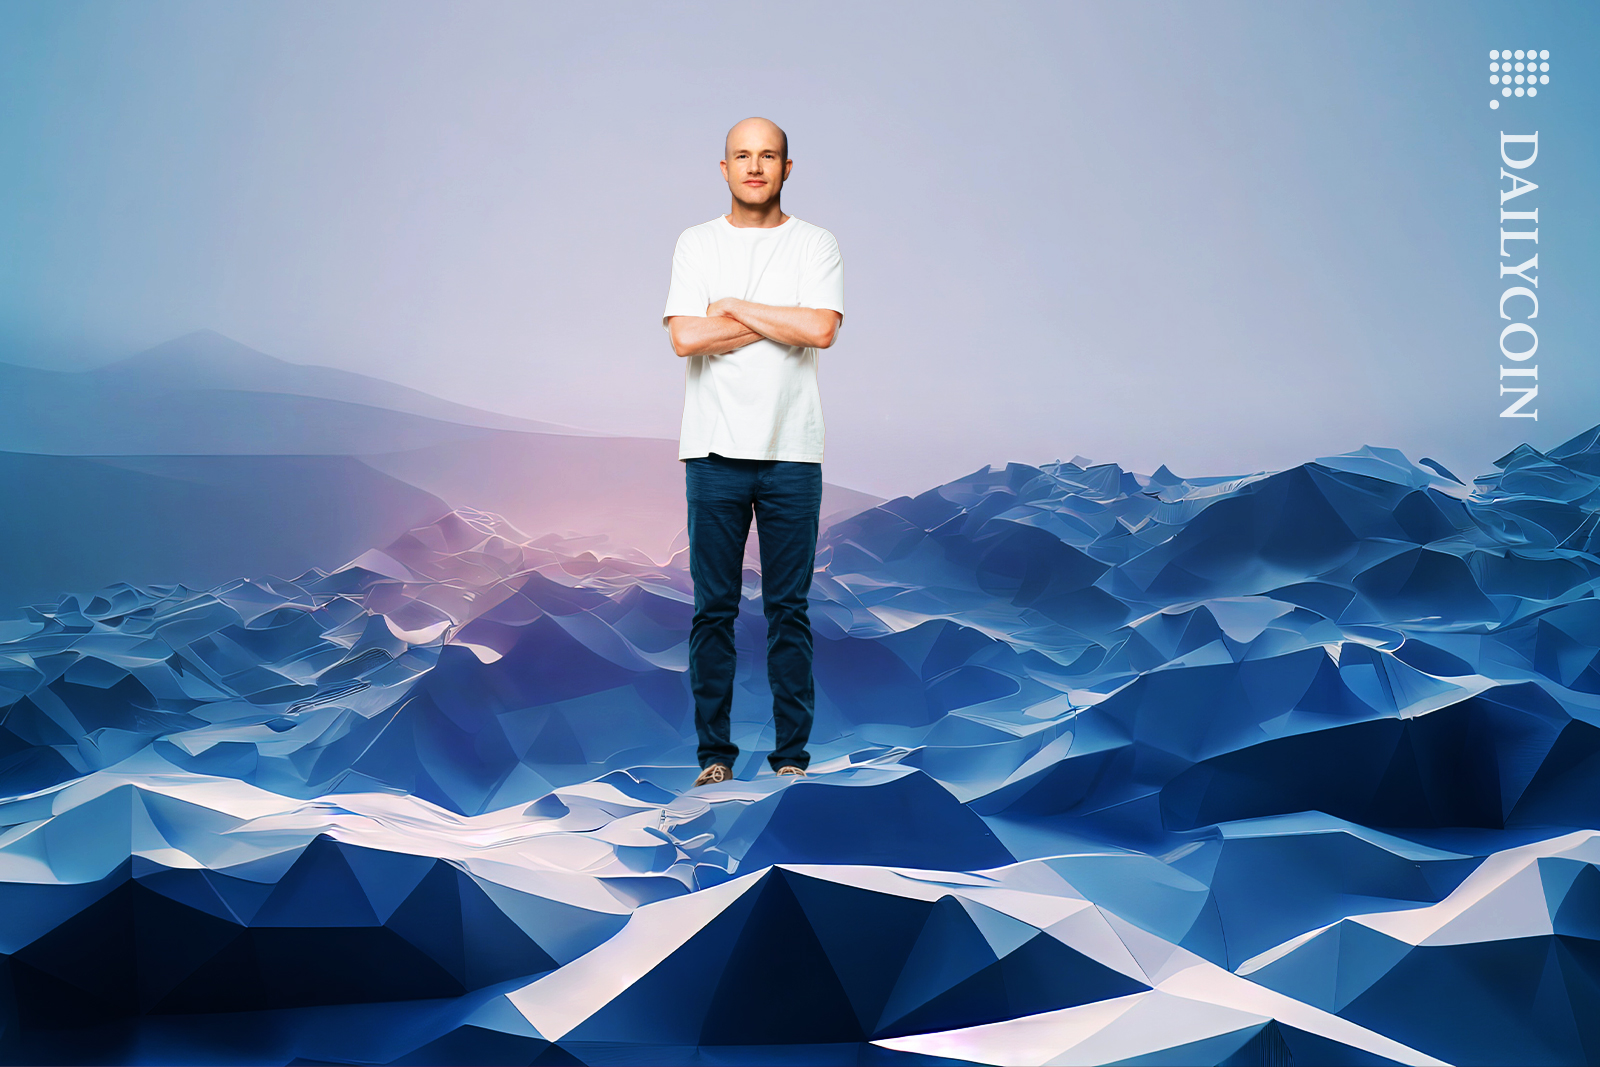 Brian Armstrong standing with his arms crossed on a Geometric low mountains terrain.